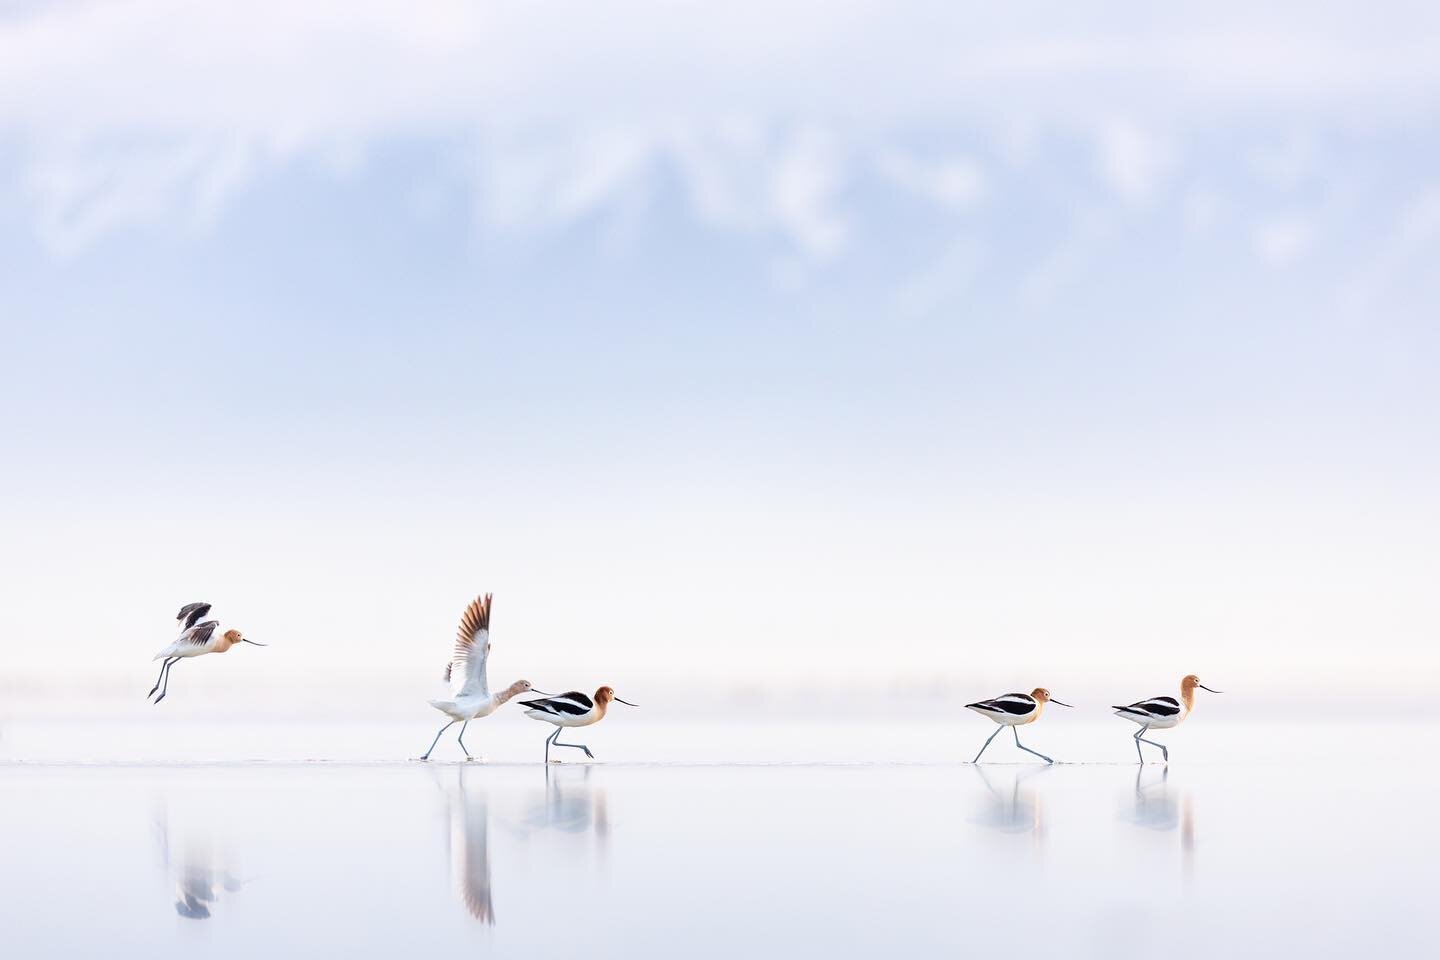 American avocets at Great Salt Lake, from spring.

Winter is coming and that means bye bye shorebirds. Time to shift my mental gears to waterfowl. I&rsquo;m still in denial about that though. Here&rsquo;s one more from an epic spring, may we see this